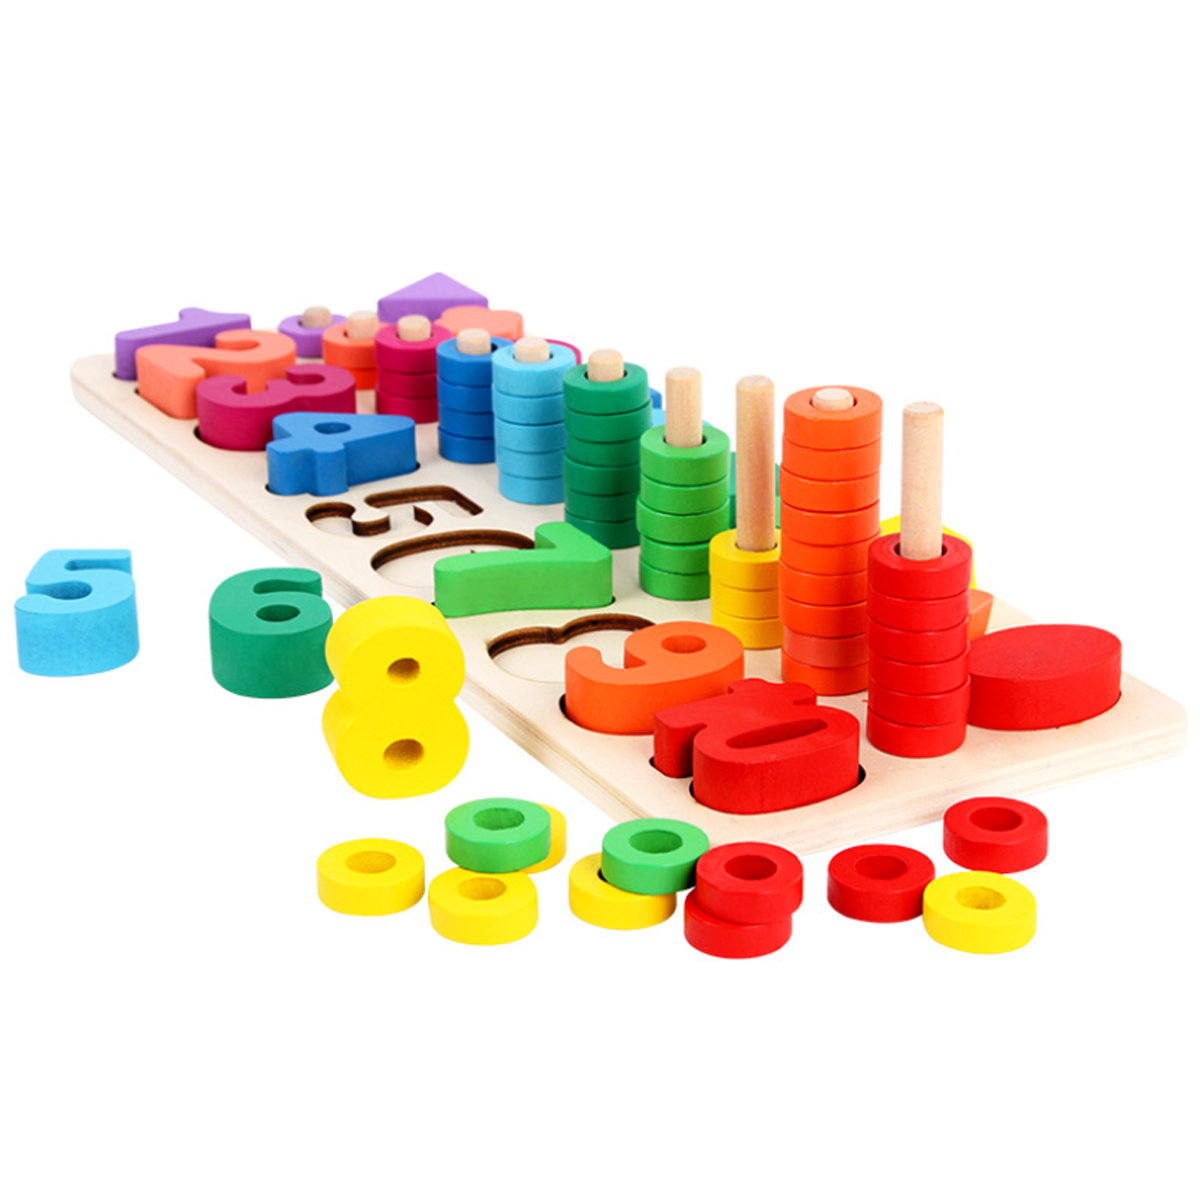 Wooden-Math-Toy-Board-Montessori-Counting-Board-Preschool-Learning-Toys-for-Children-Gifts-1629382-3